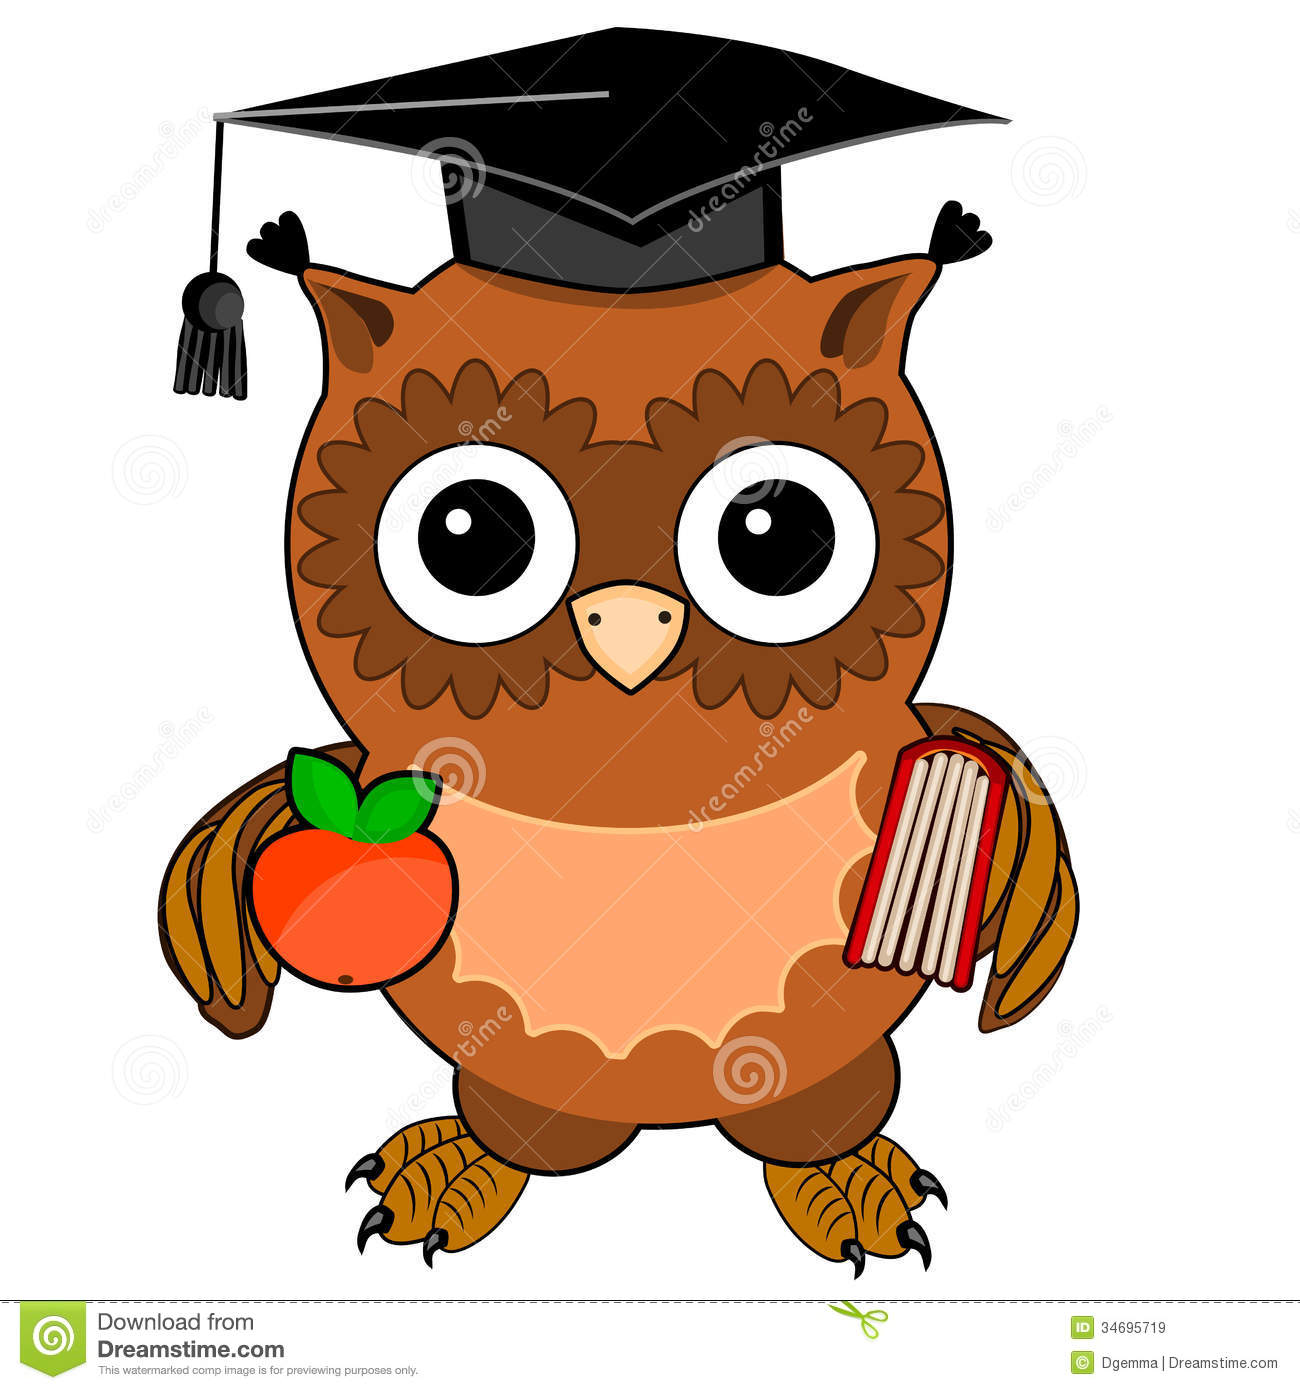 Smart Owl Clipart Cute Owl Royalty Free Stock